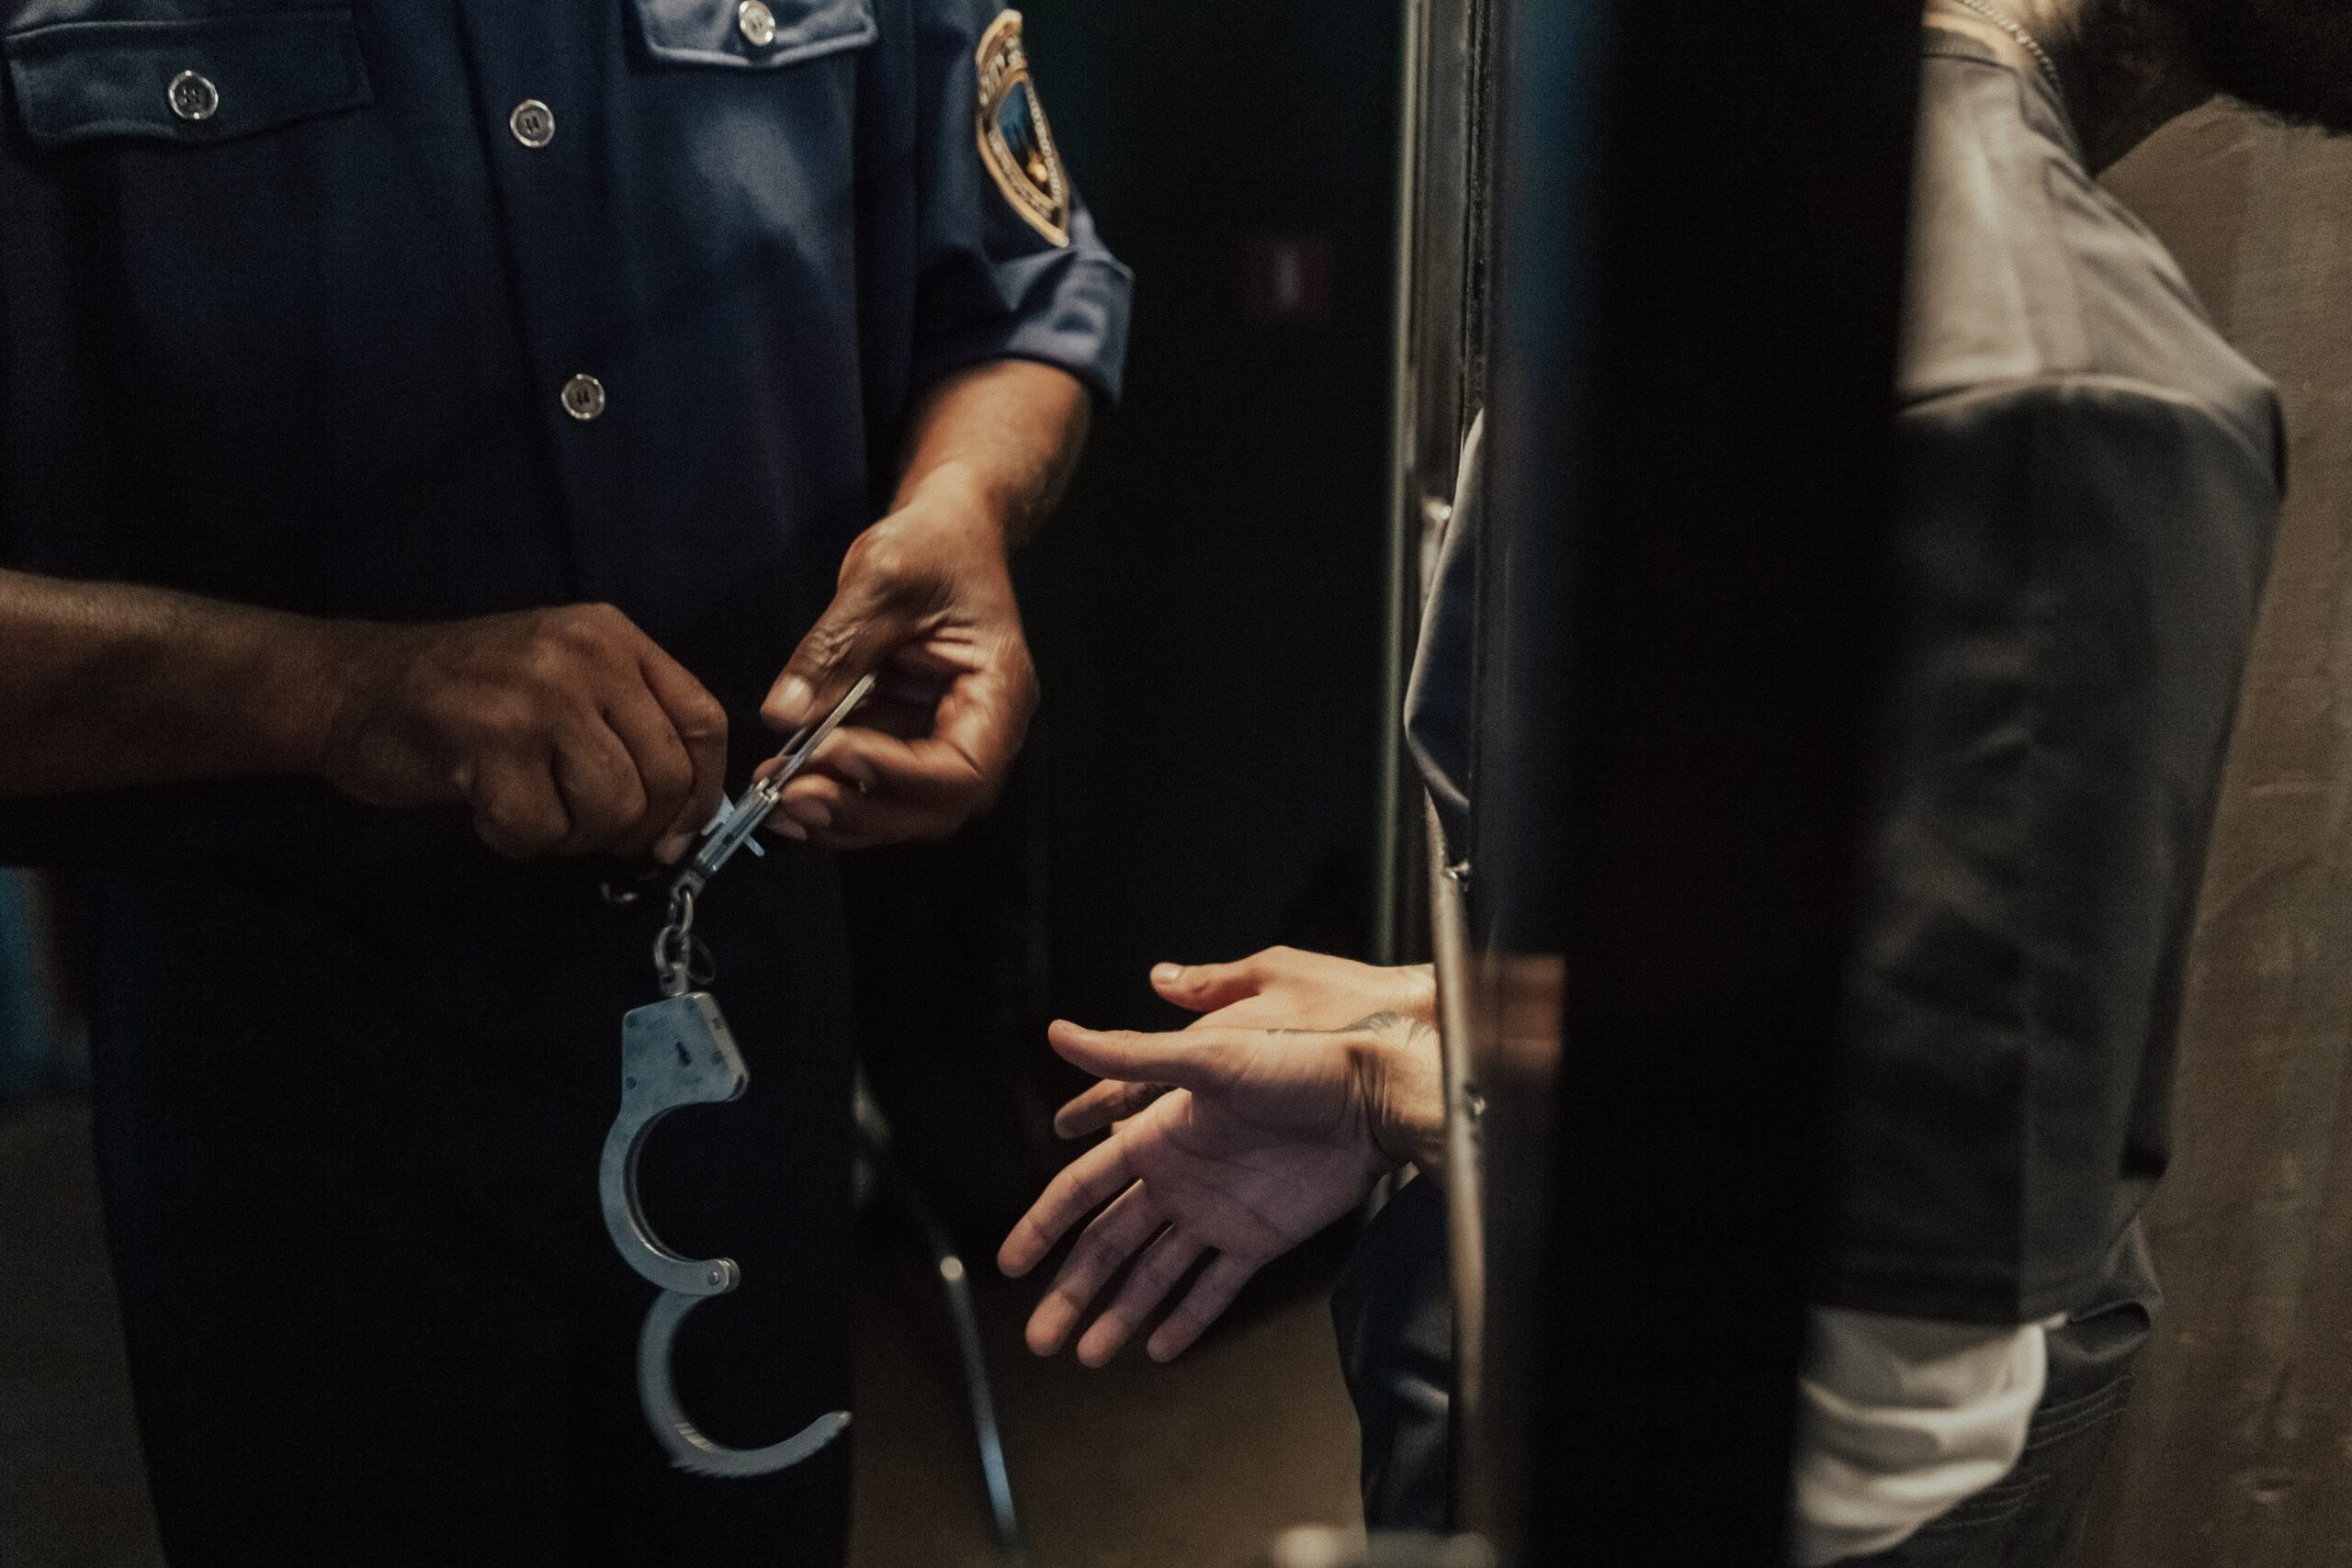 Handcuffs indicating a person going to jailfor tax evasion